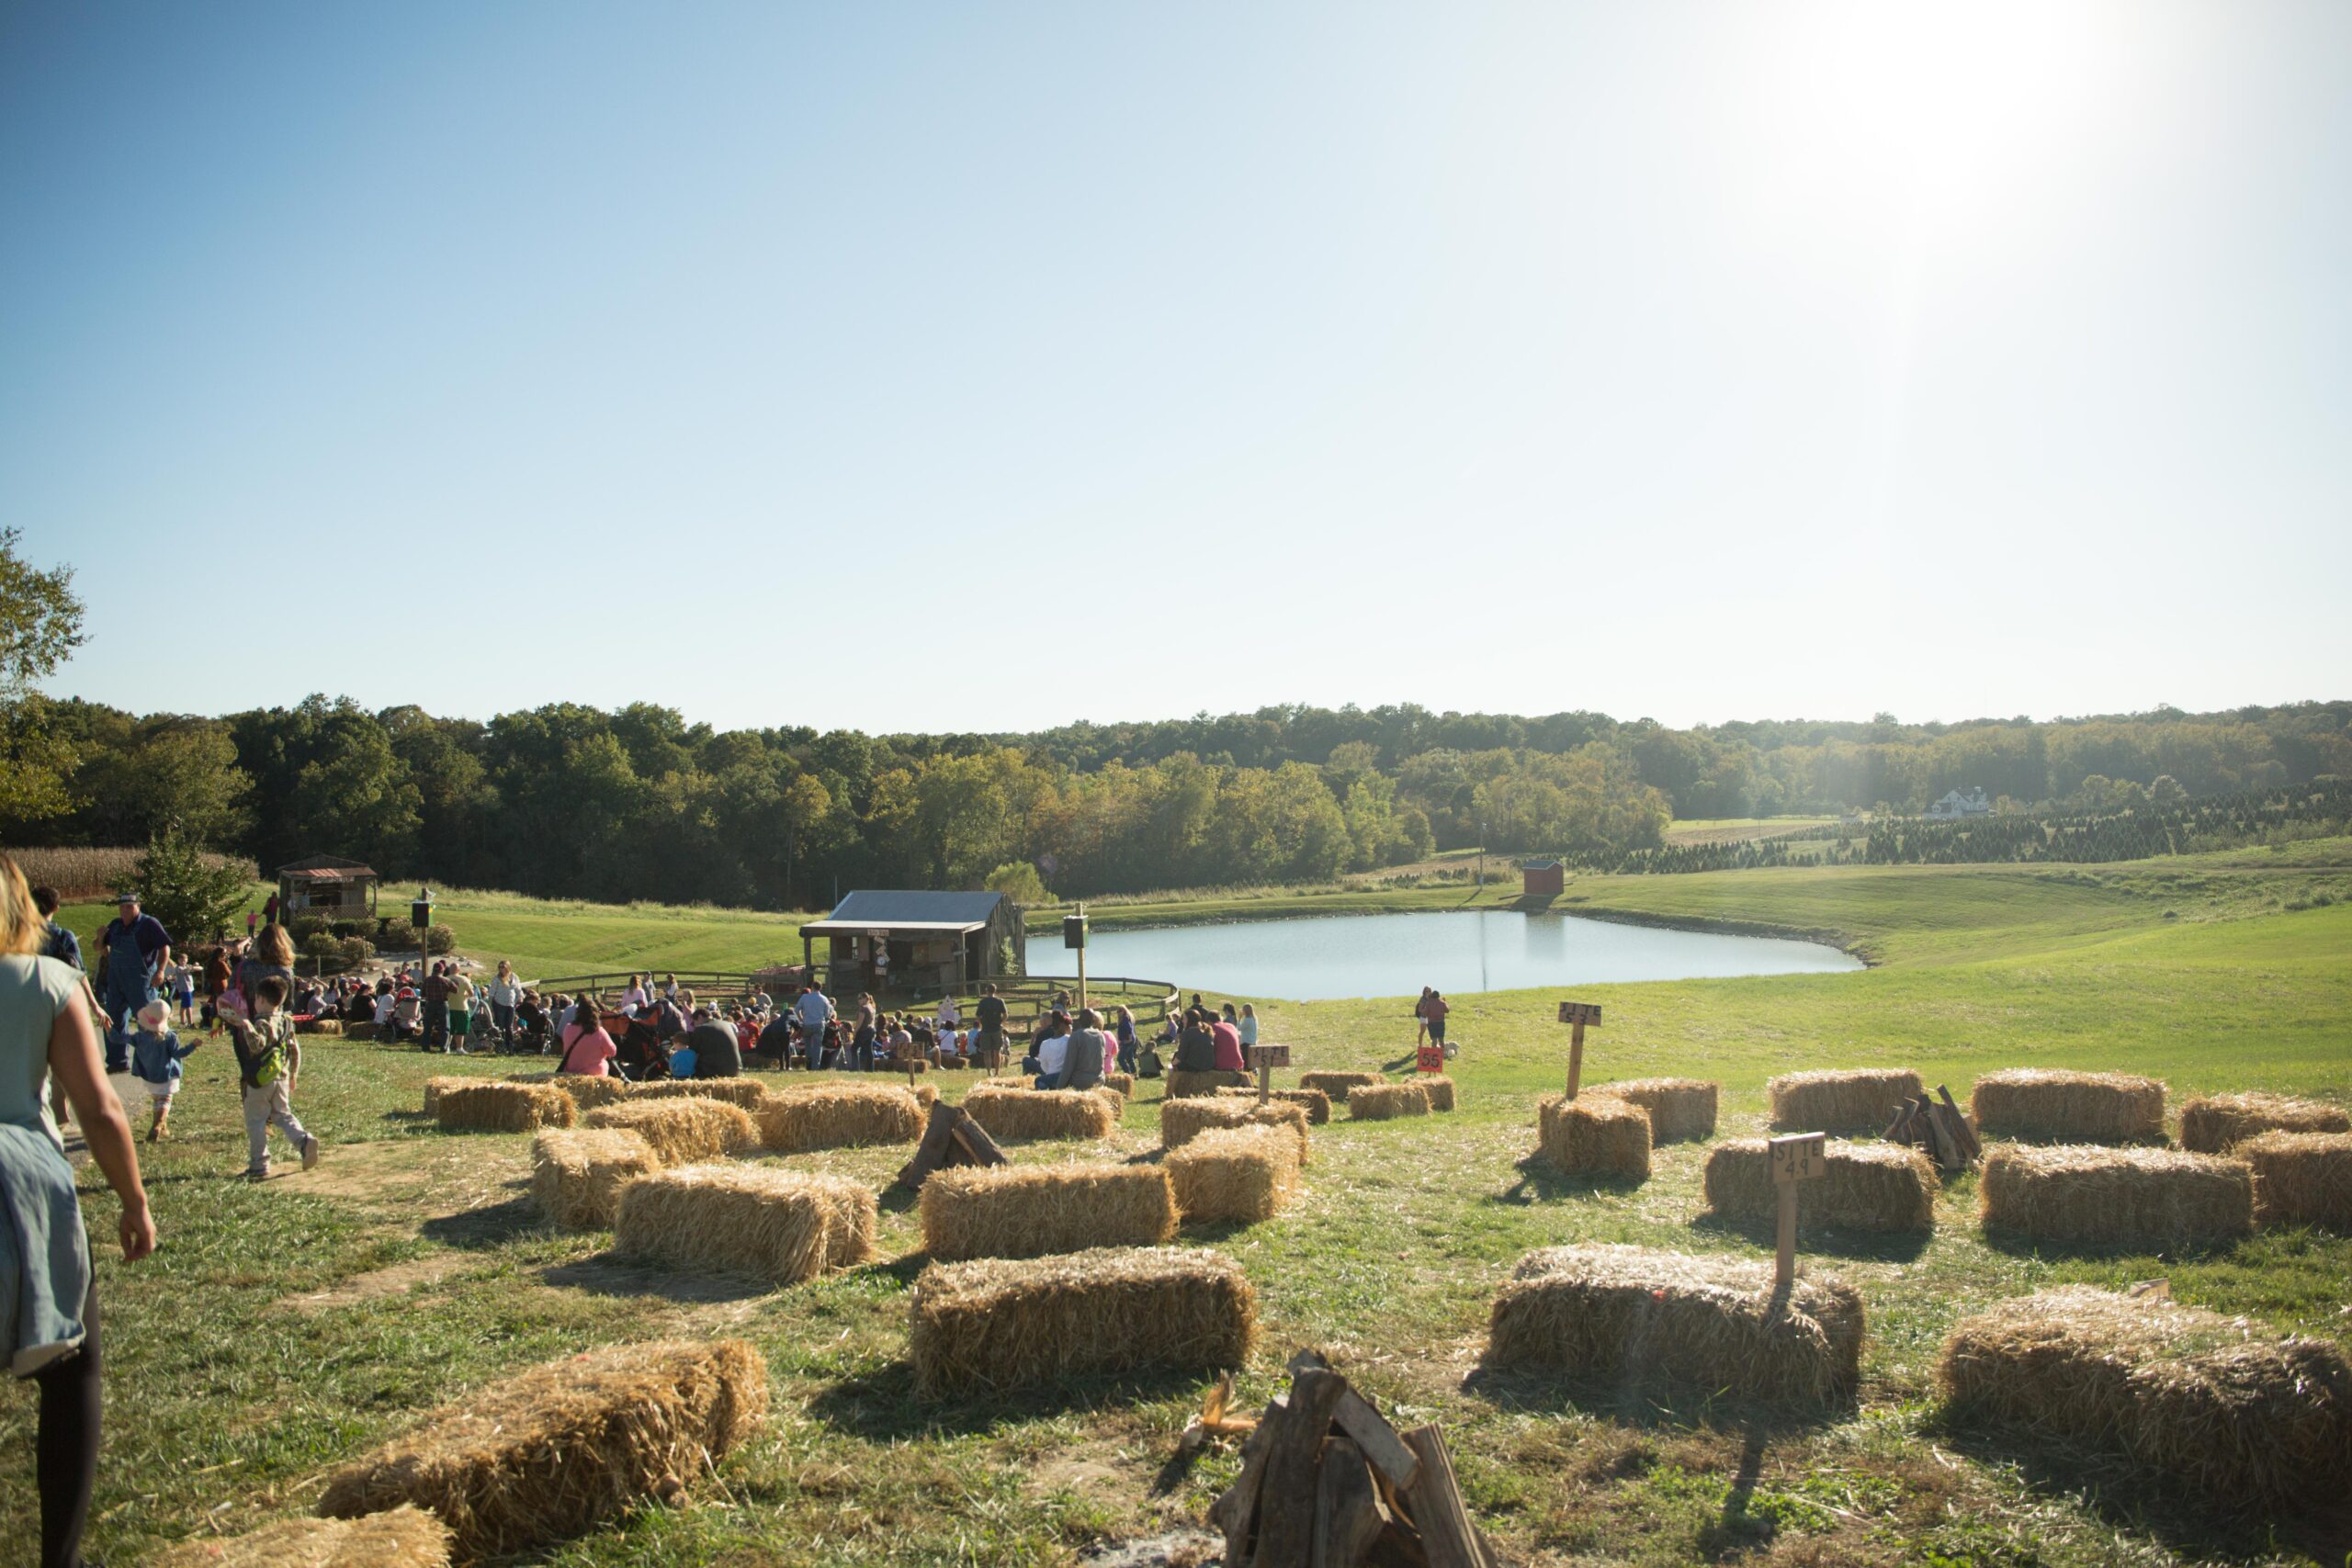 A sunny outdoor gathering with hay bales for seating near a pond under a clear sky.